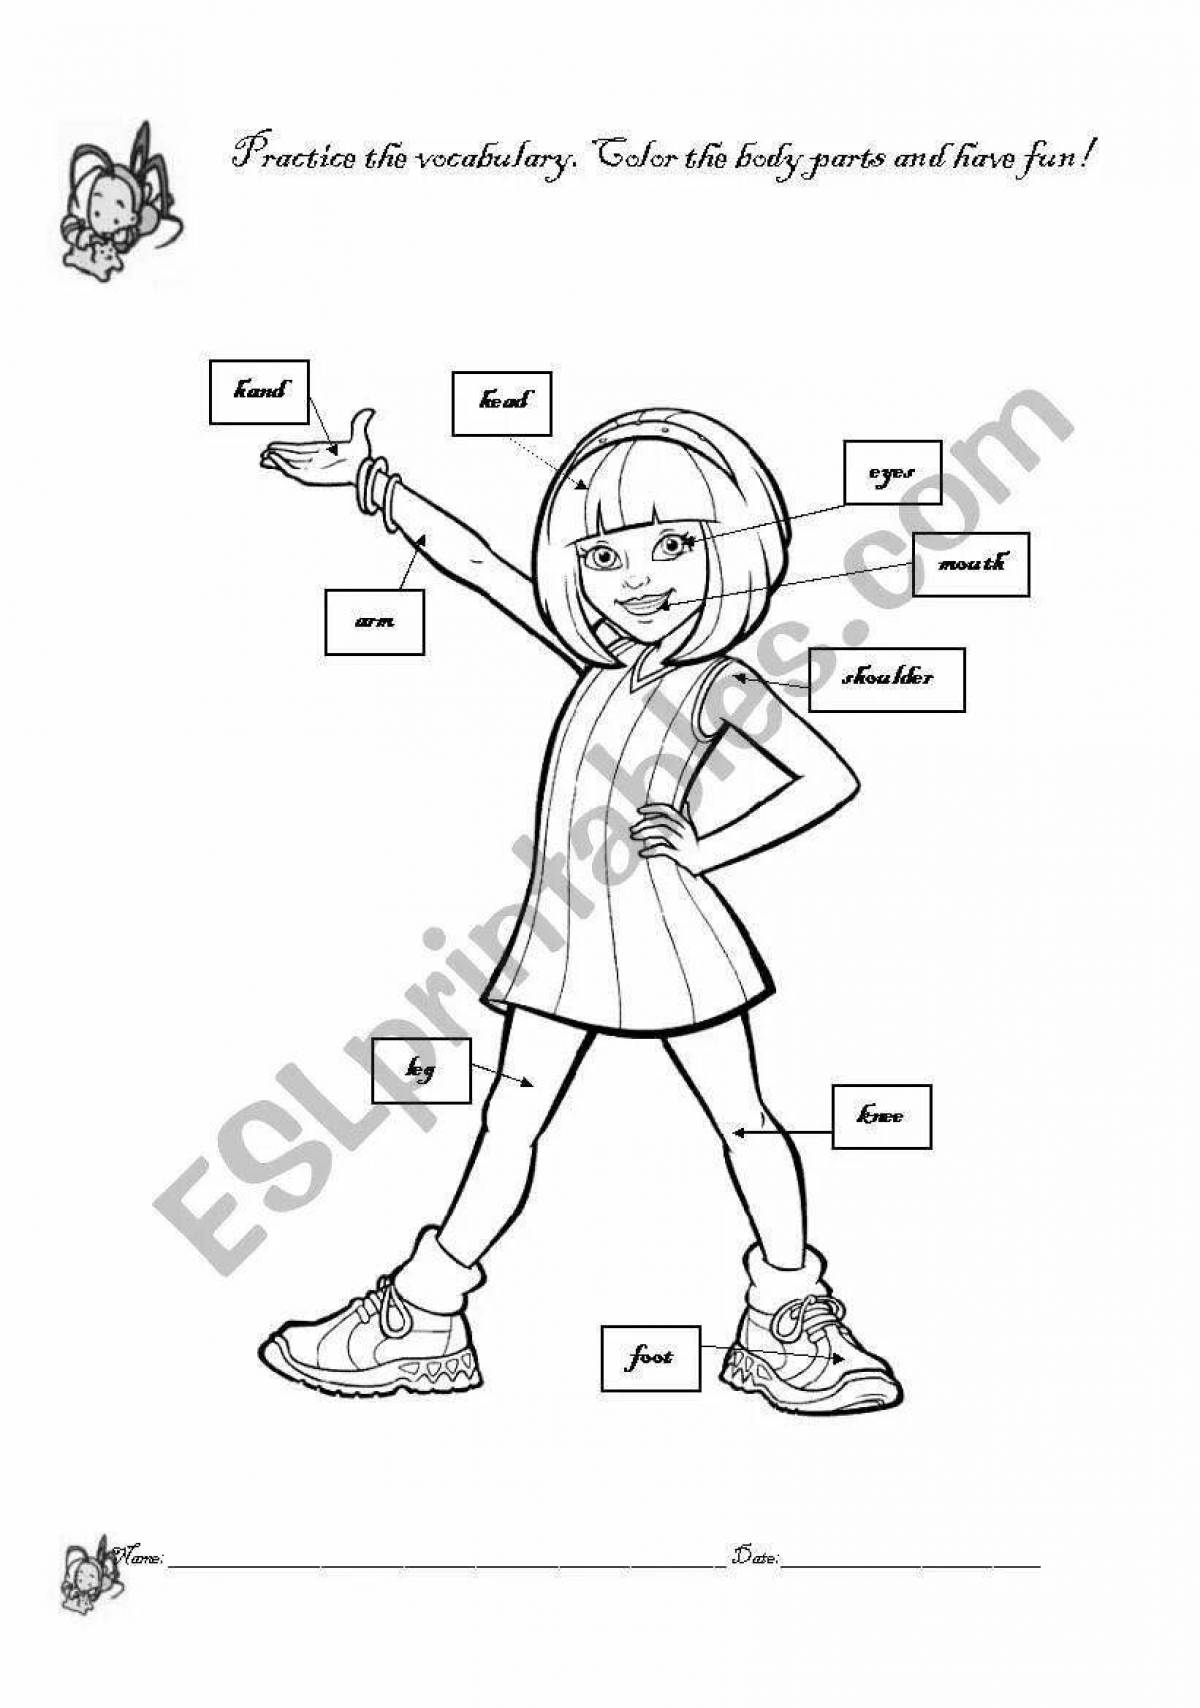 Coloring page of body parts